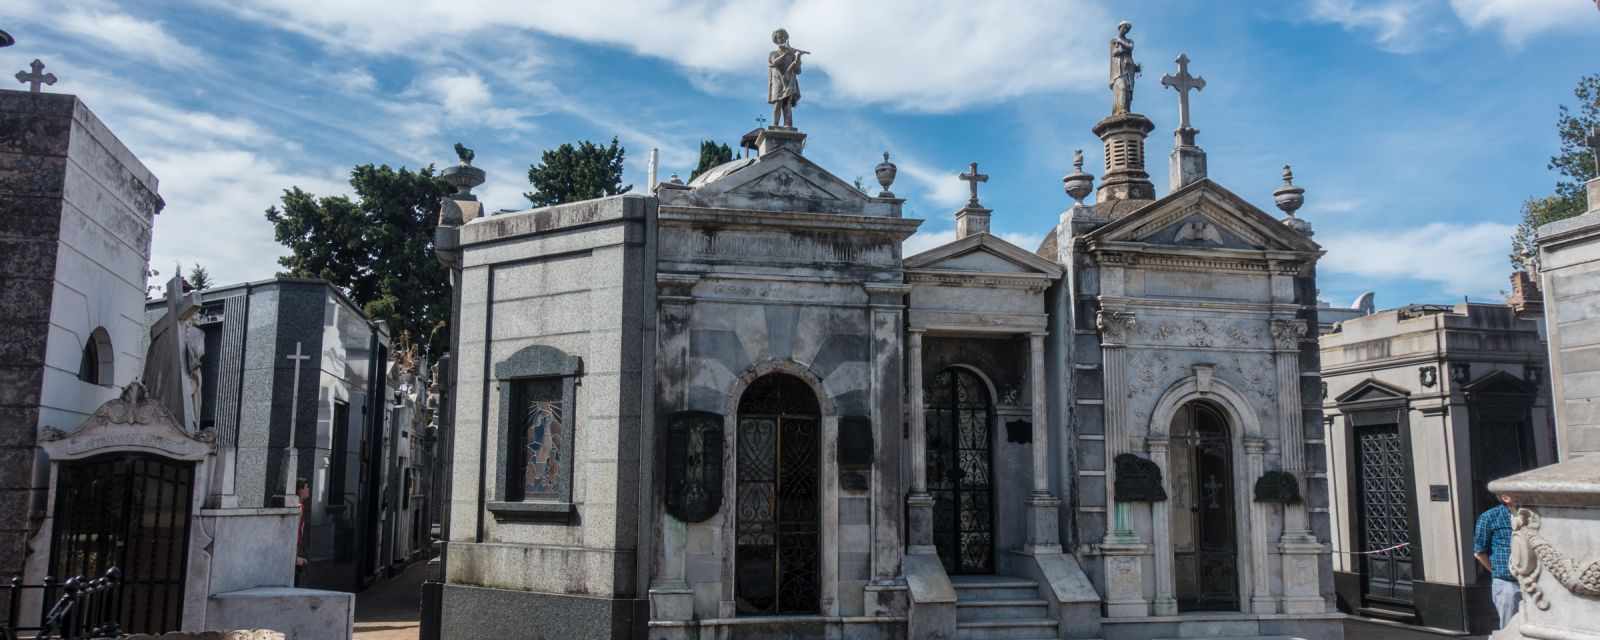 Recoleta Cemetery in Buenos Aires - Stories & Tips